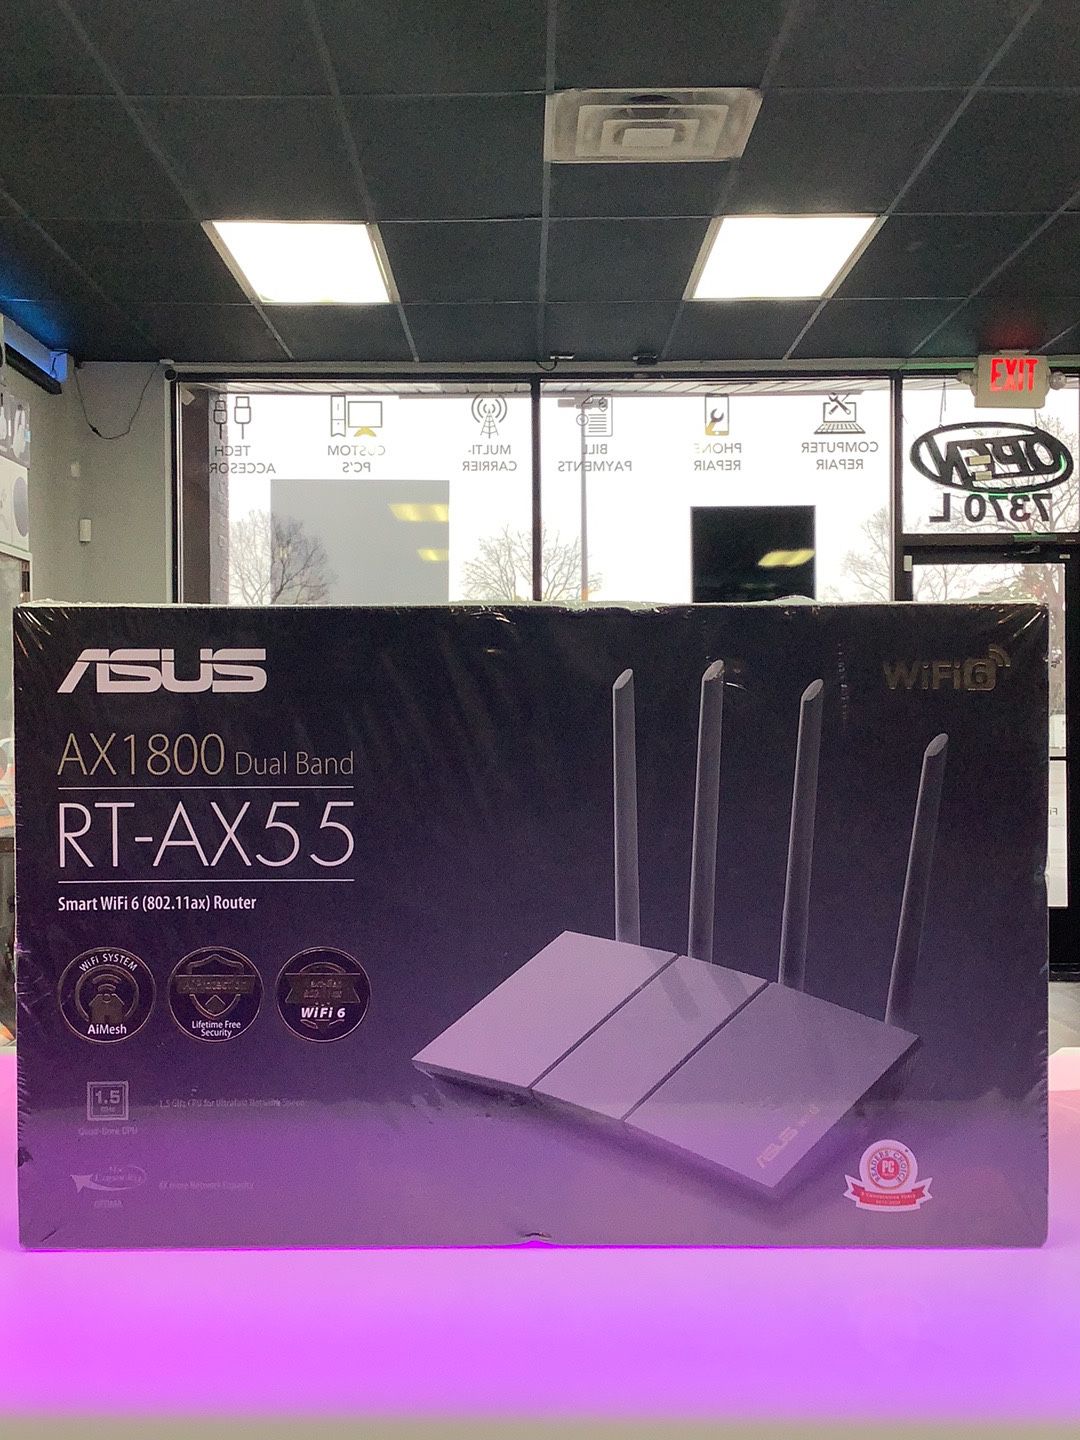 Asus AX1800 Dual Band RT-AX55 Smart WiFi 6 Router - Brand New